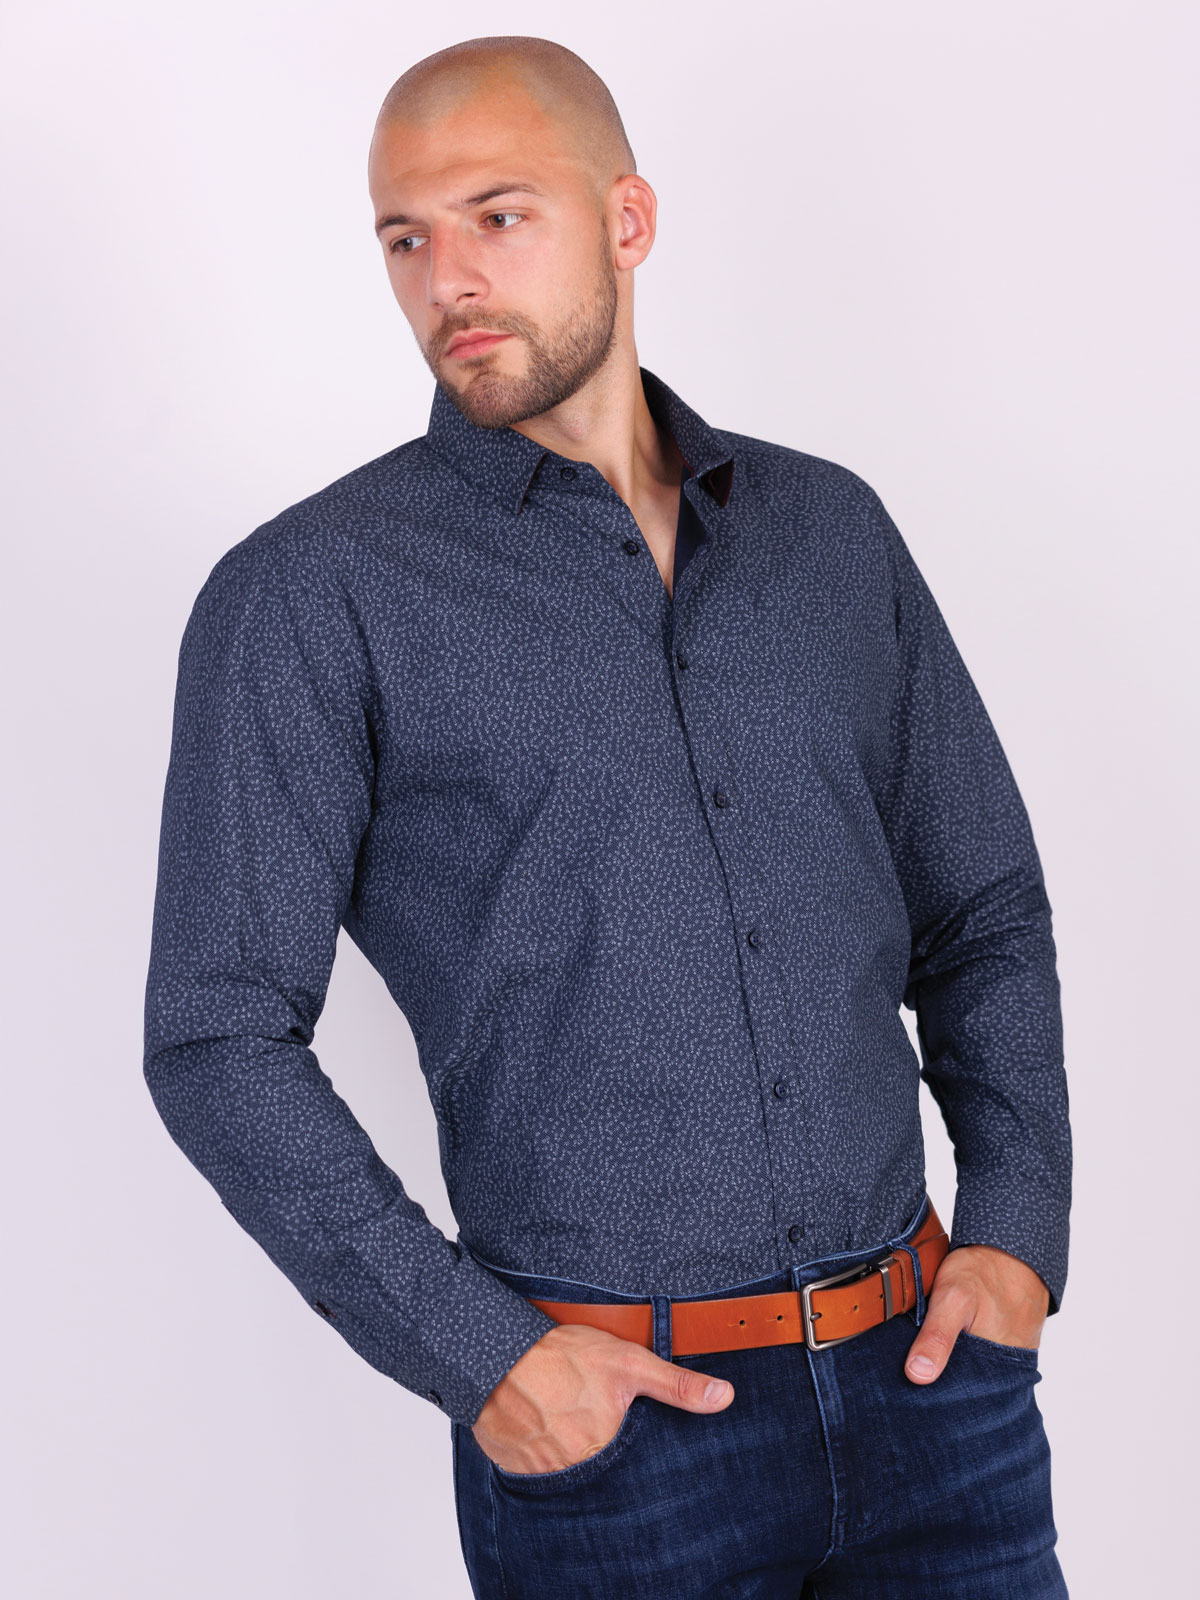 Mens shirt with gray figures - 21575 € 44.43 img3